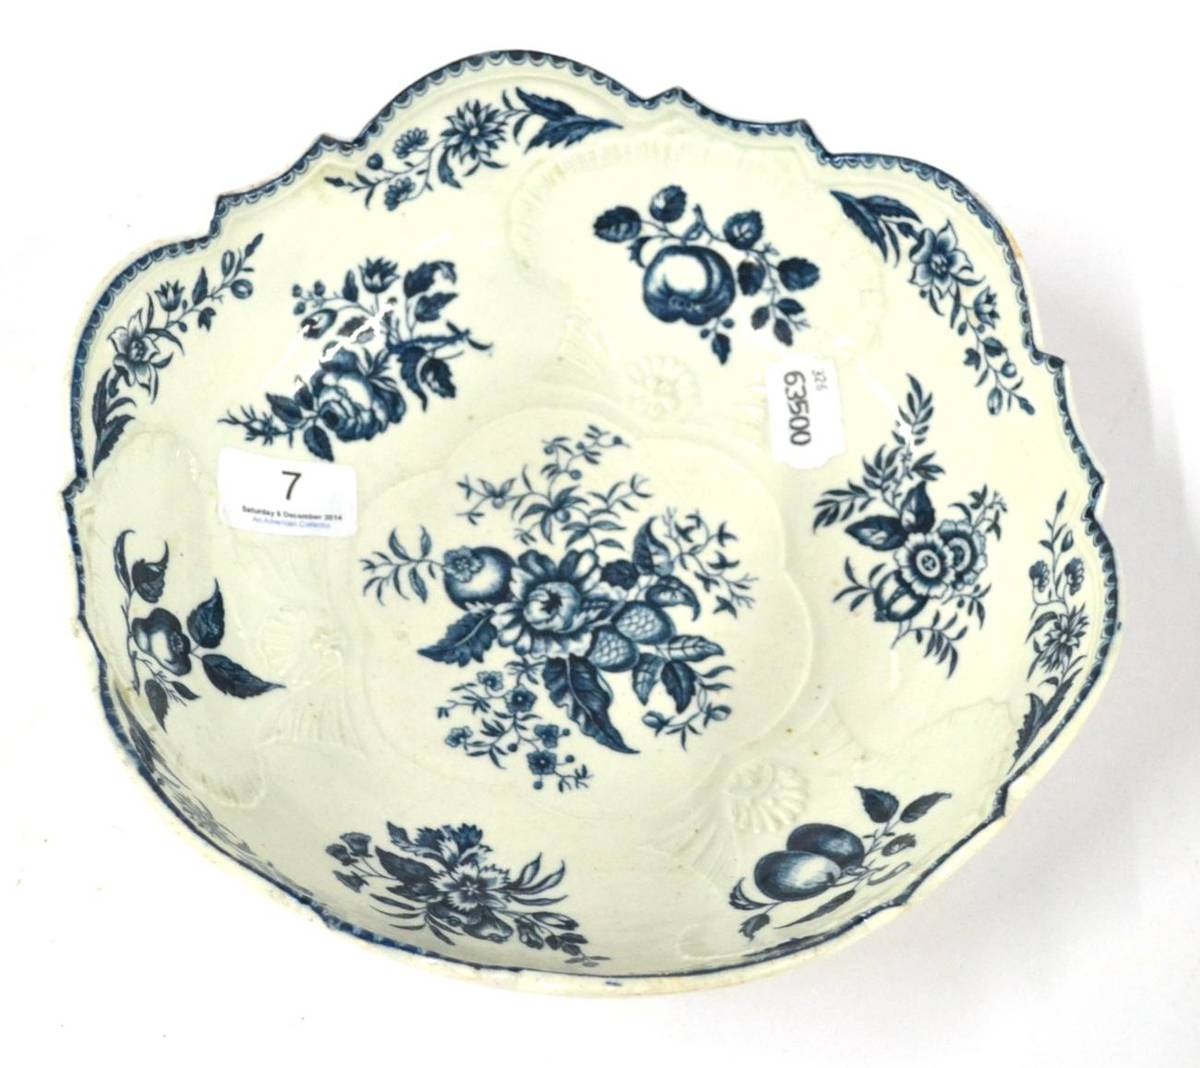 Lot 7 - A First Period Worcester Porcelain Junket Dish, circa 1775, printed in underglaze blue with the...